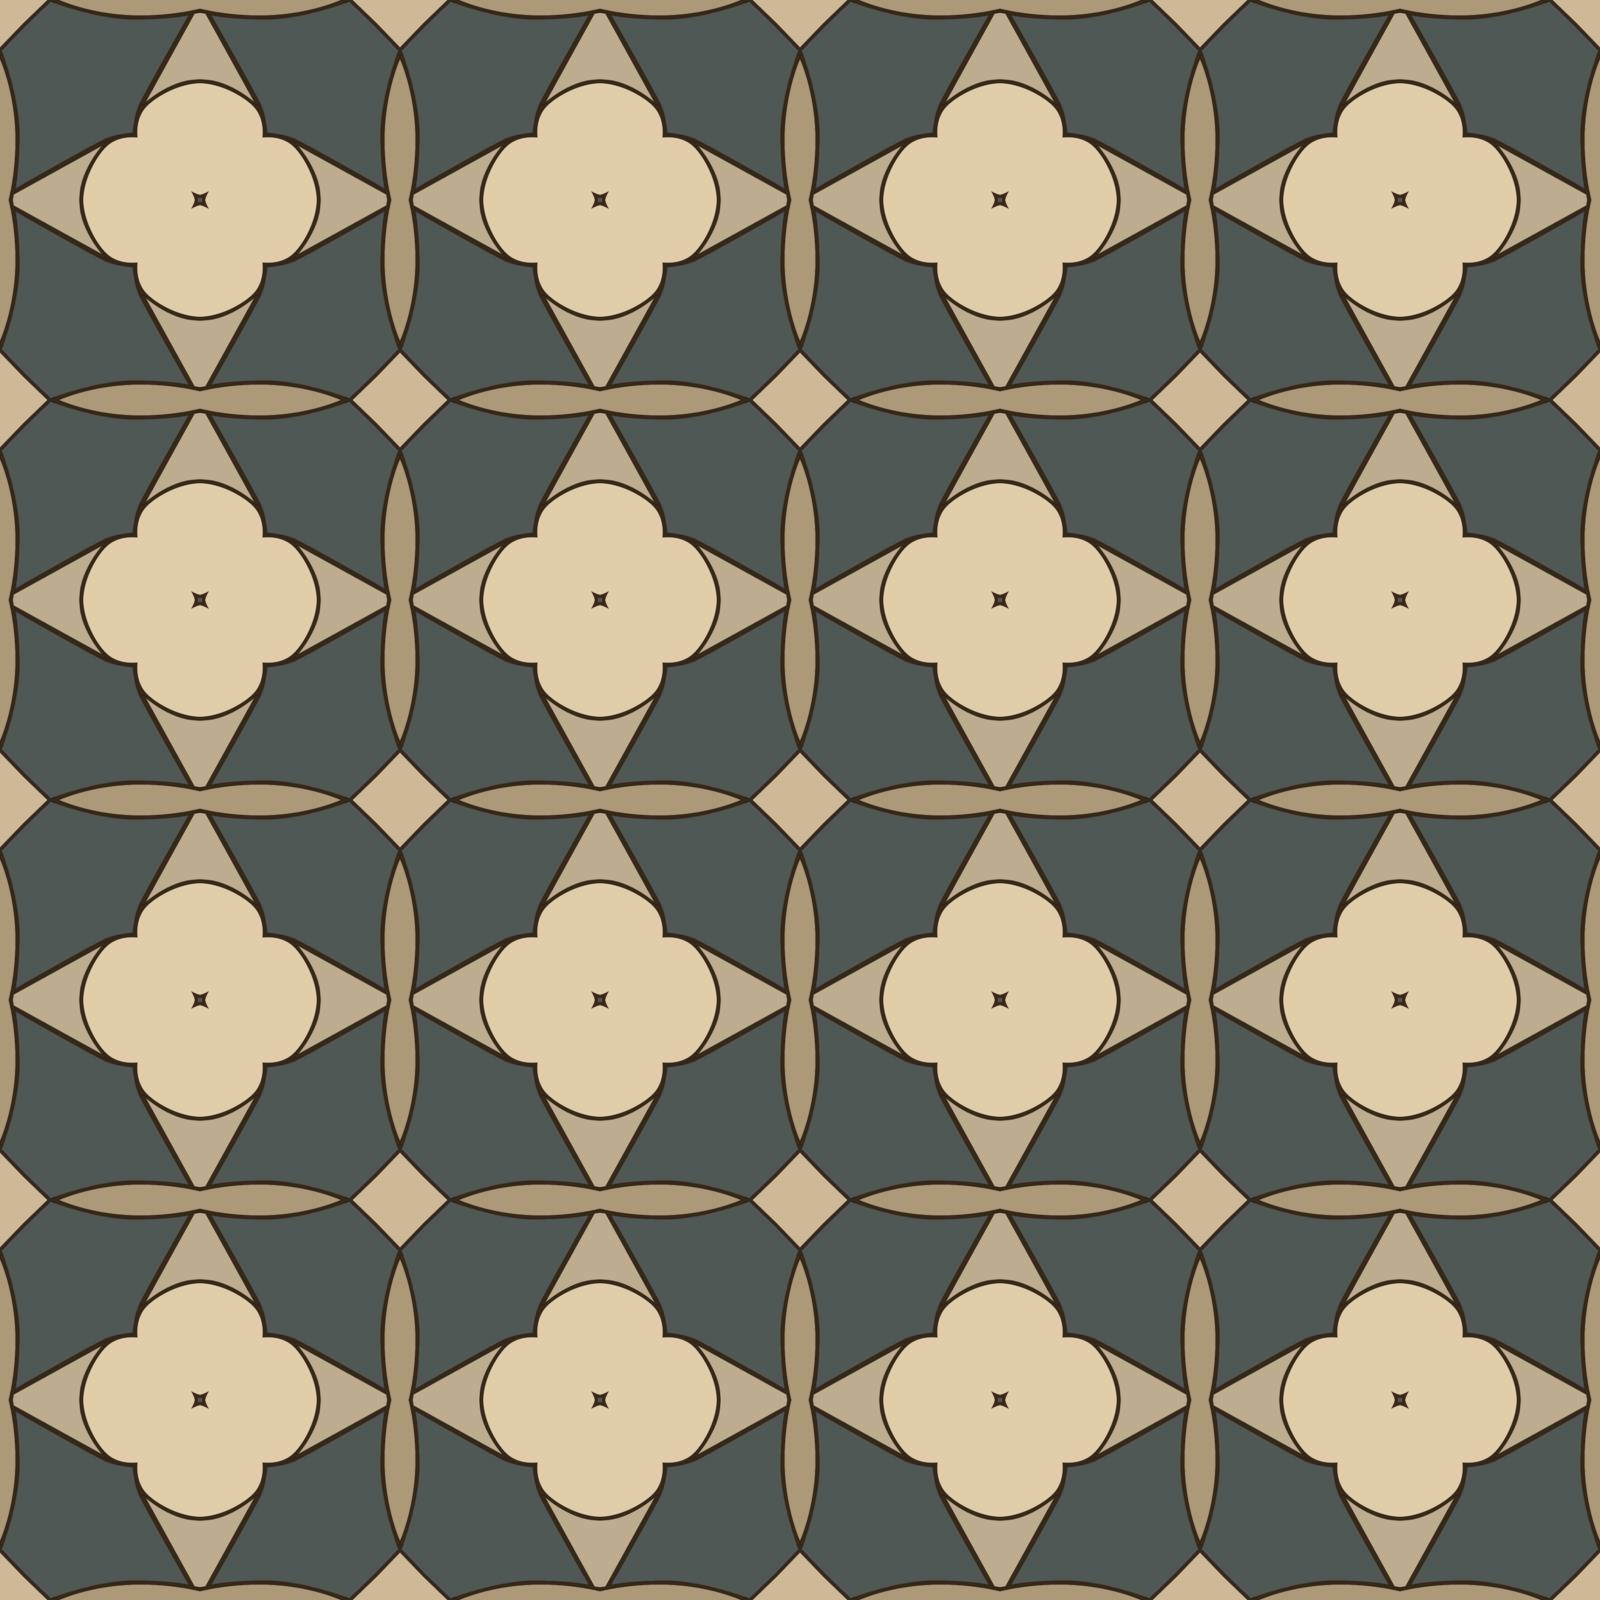 Seamless illustrated pattern made of abstract elements in beige, brown, green and black